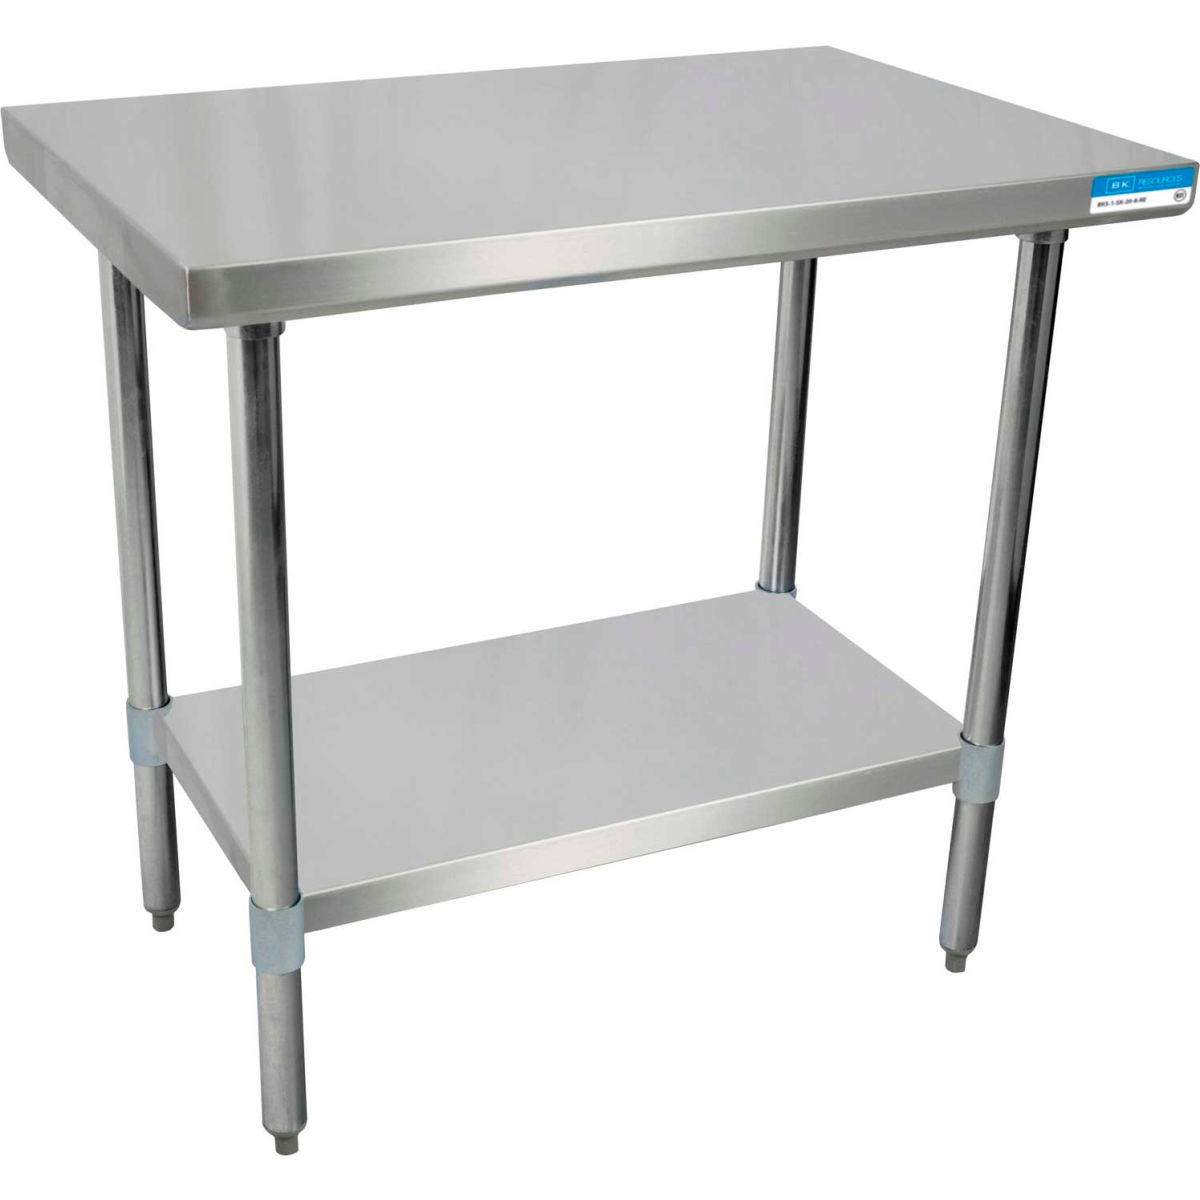 Picture of BK Resources B0899552 18 Gauge 430 Series Stainless Workbench with Adjustable Undershelf - 48 x 24 in.